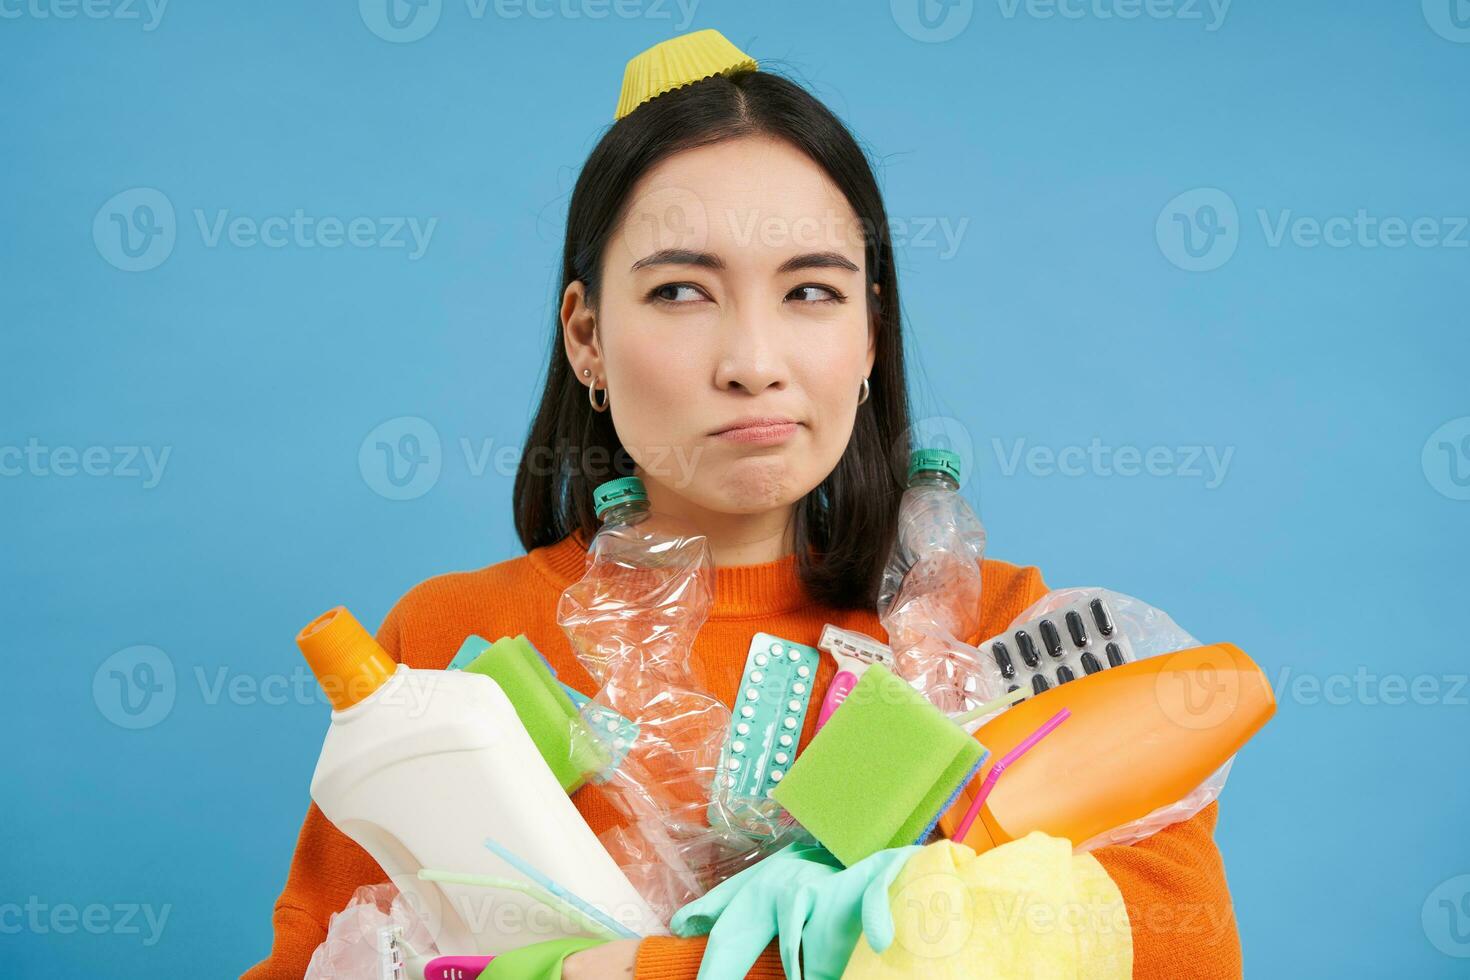 Puzzled young woman with pile of garbage, holds plastic bottles and trash for recycling, looks perplexed, blue background photo